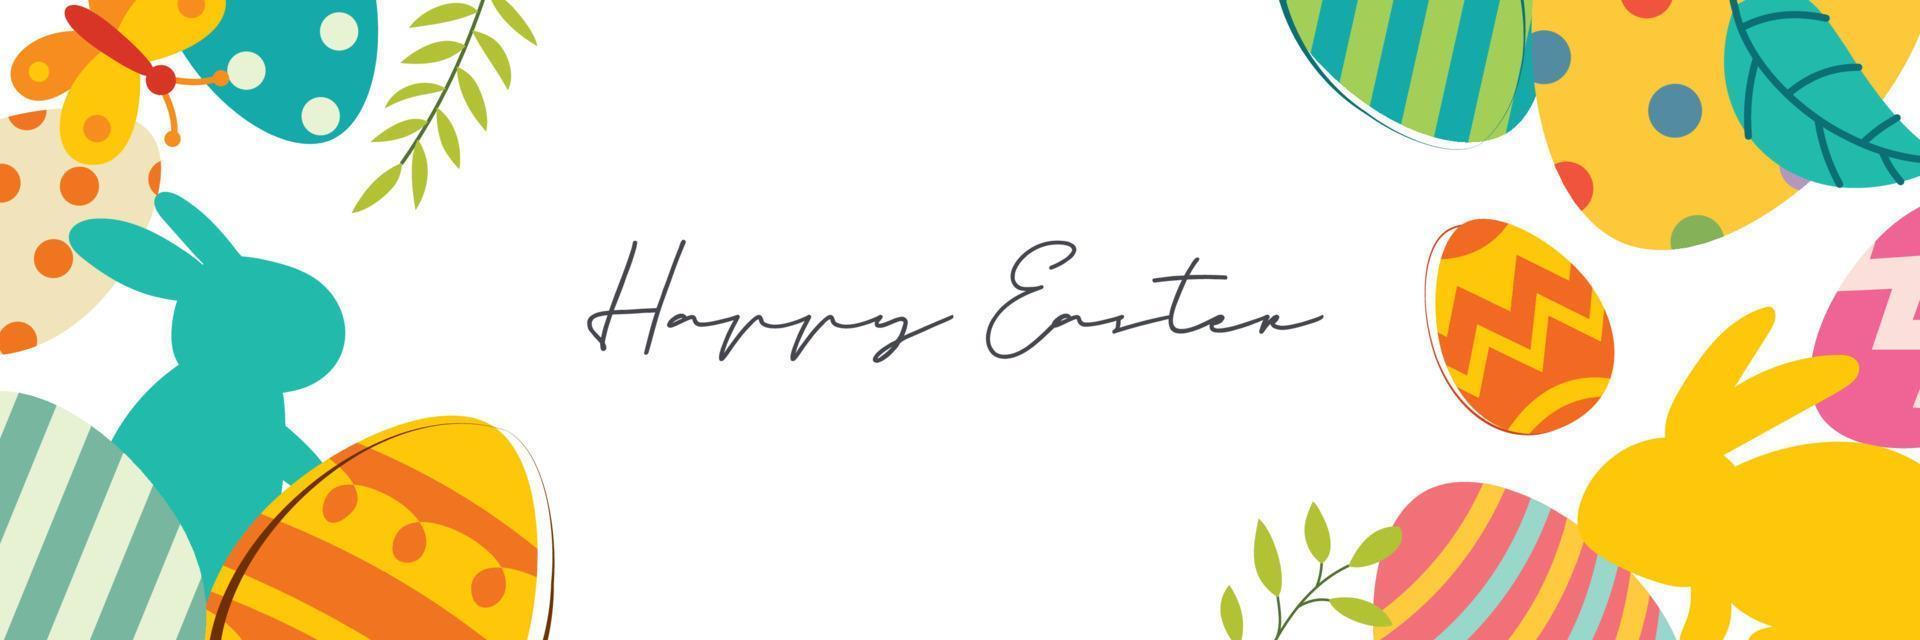 Happy easter egg greeting card background template.Can be used for cover, invitation, ad, wallpaper,flyers, posters, brochure. vector